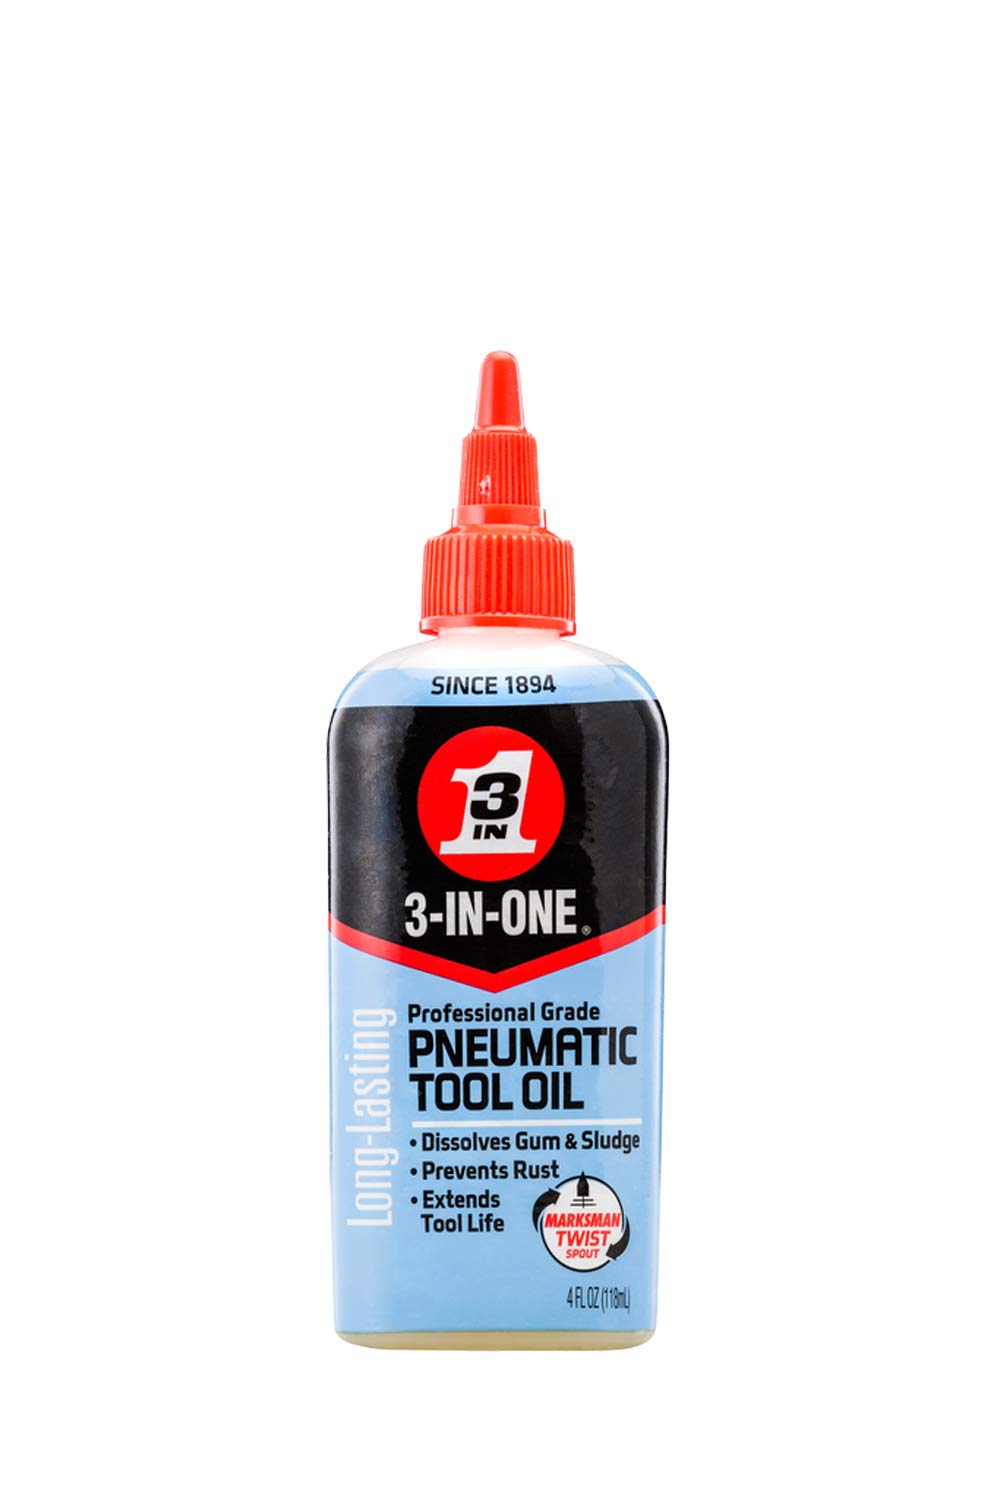 3-IN-ONE Professional Grade Pneumatic Tool Oil, 4 OZ